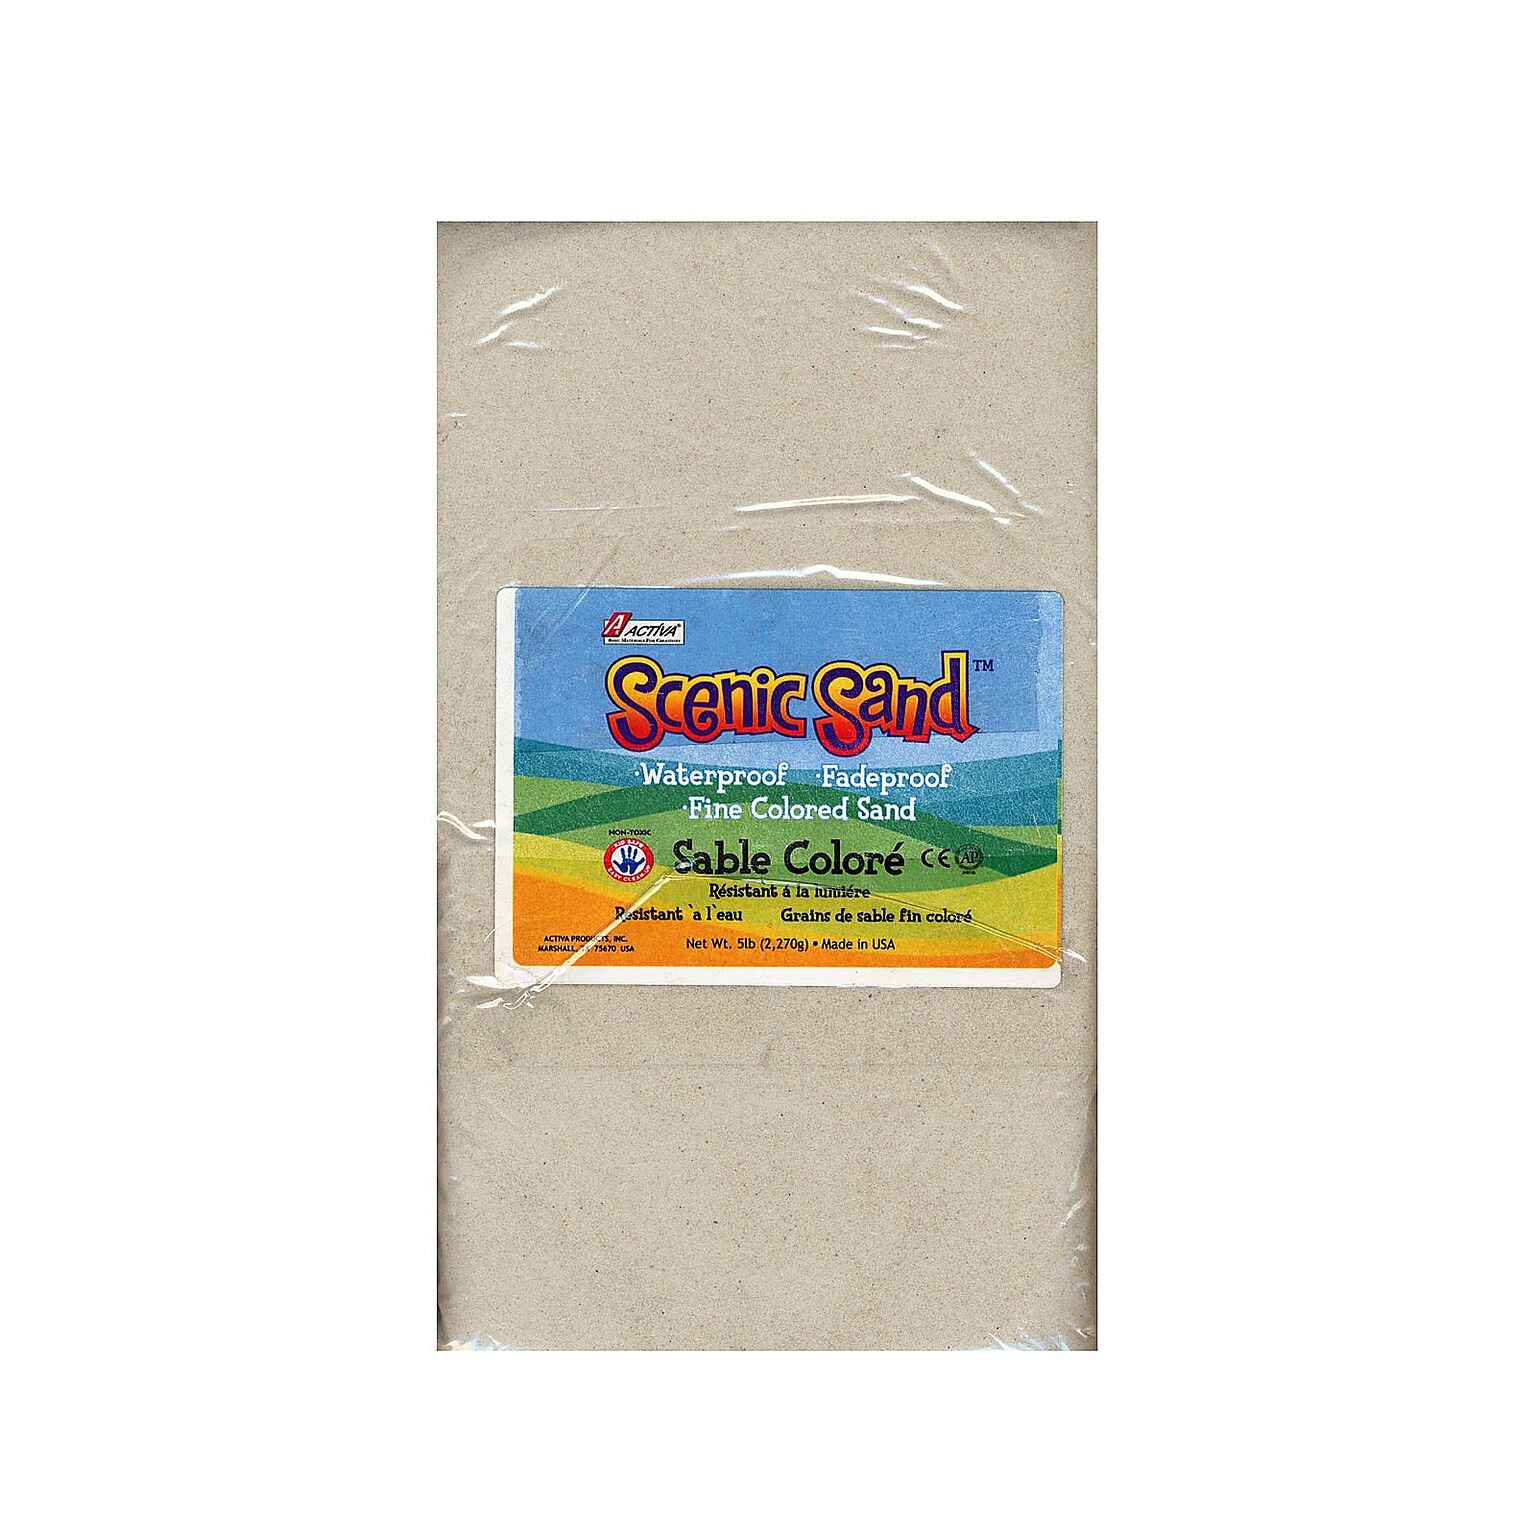 Activa Products Scenic Sand White 5 Lb. Bag [Pack Of 2] (2PK-4553)